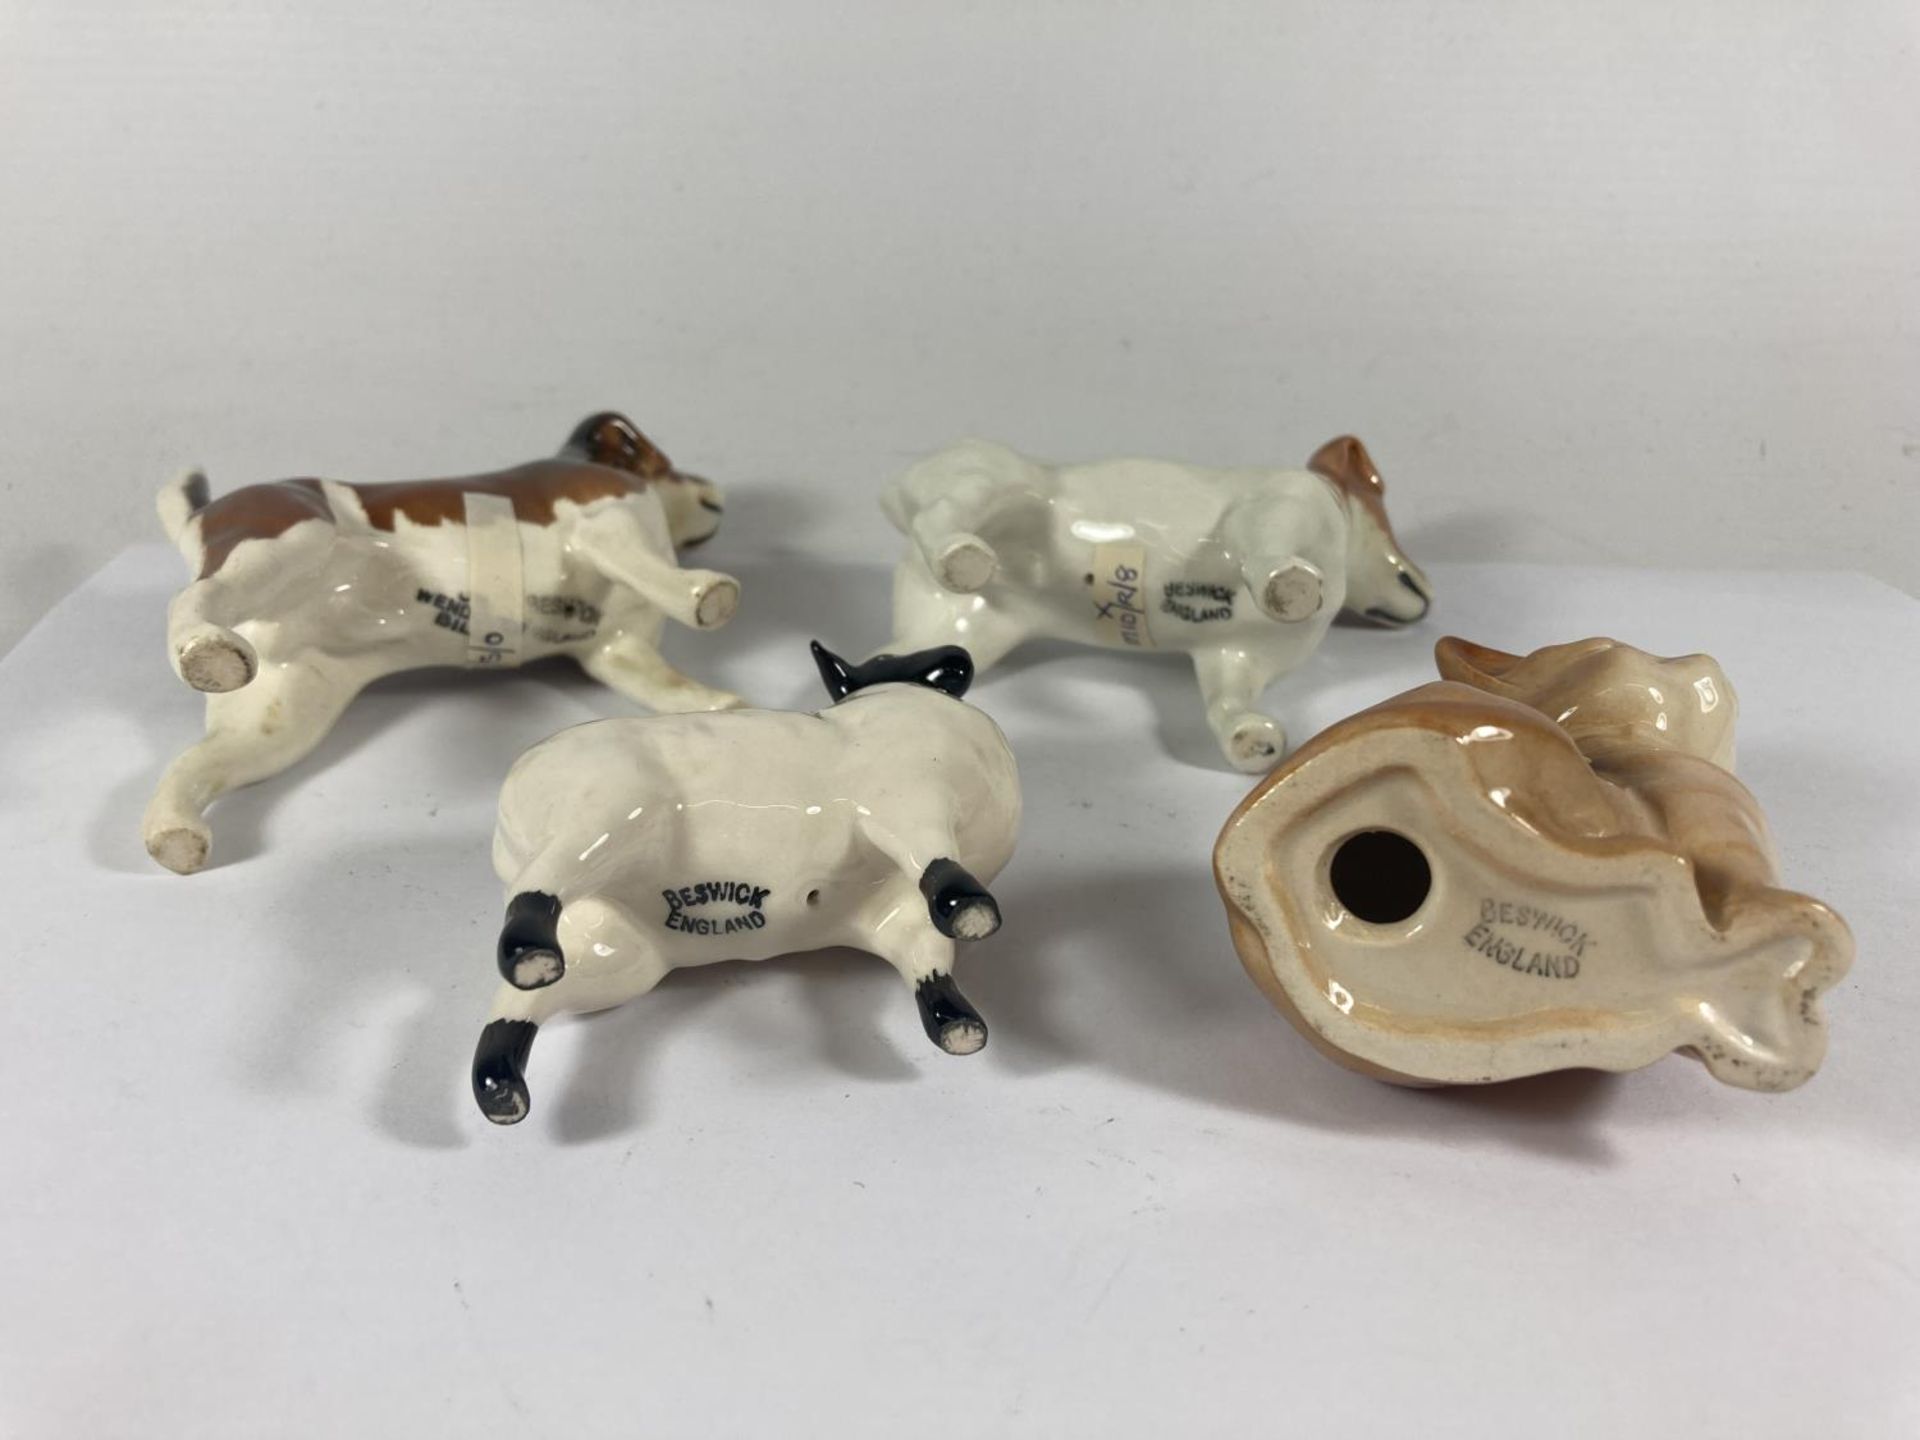 FOUR BESWICK FIGURES TO INCLUDE A JACK RUSSEL, HOUND, A LAMB AND A CAT - Image 6 of 6